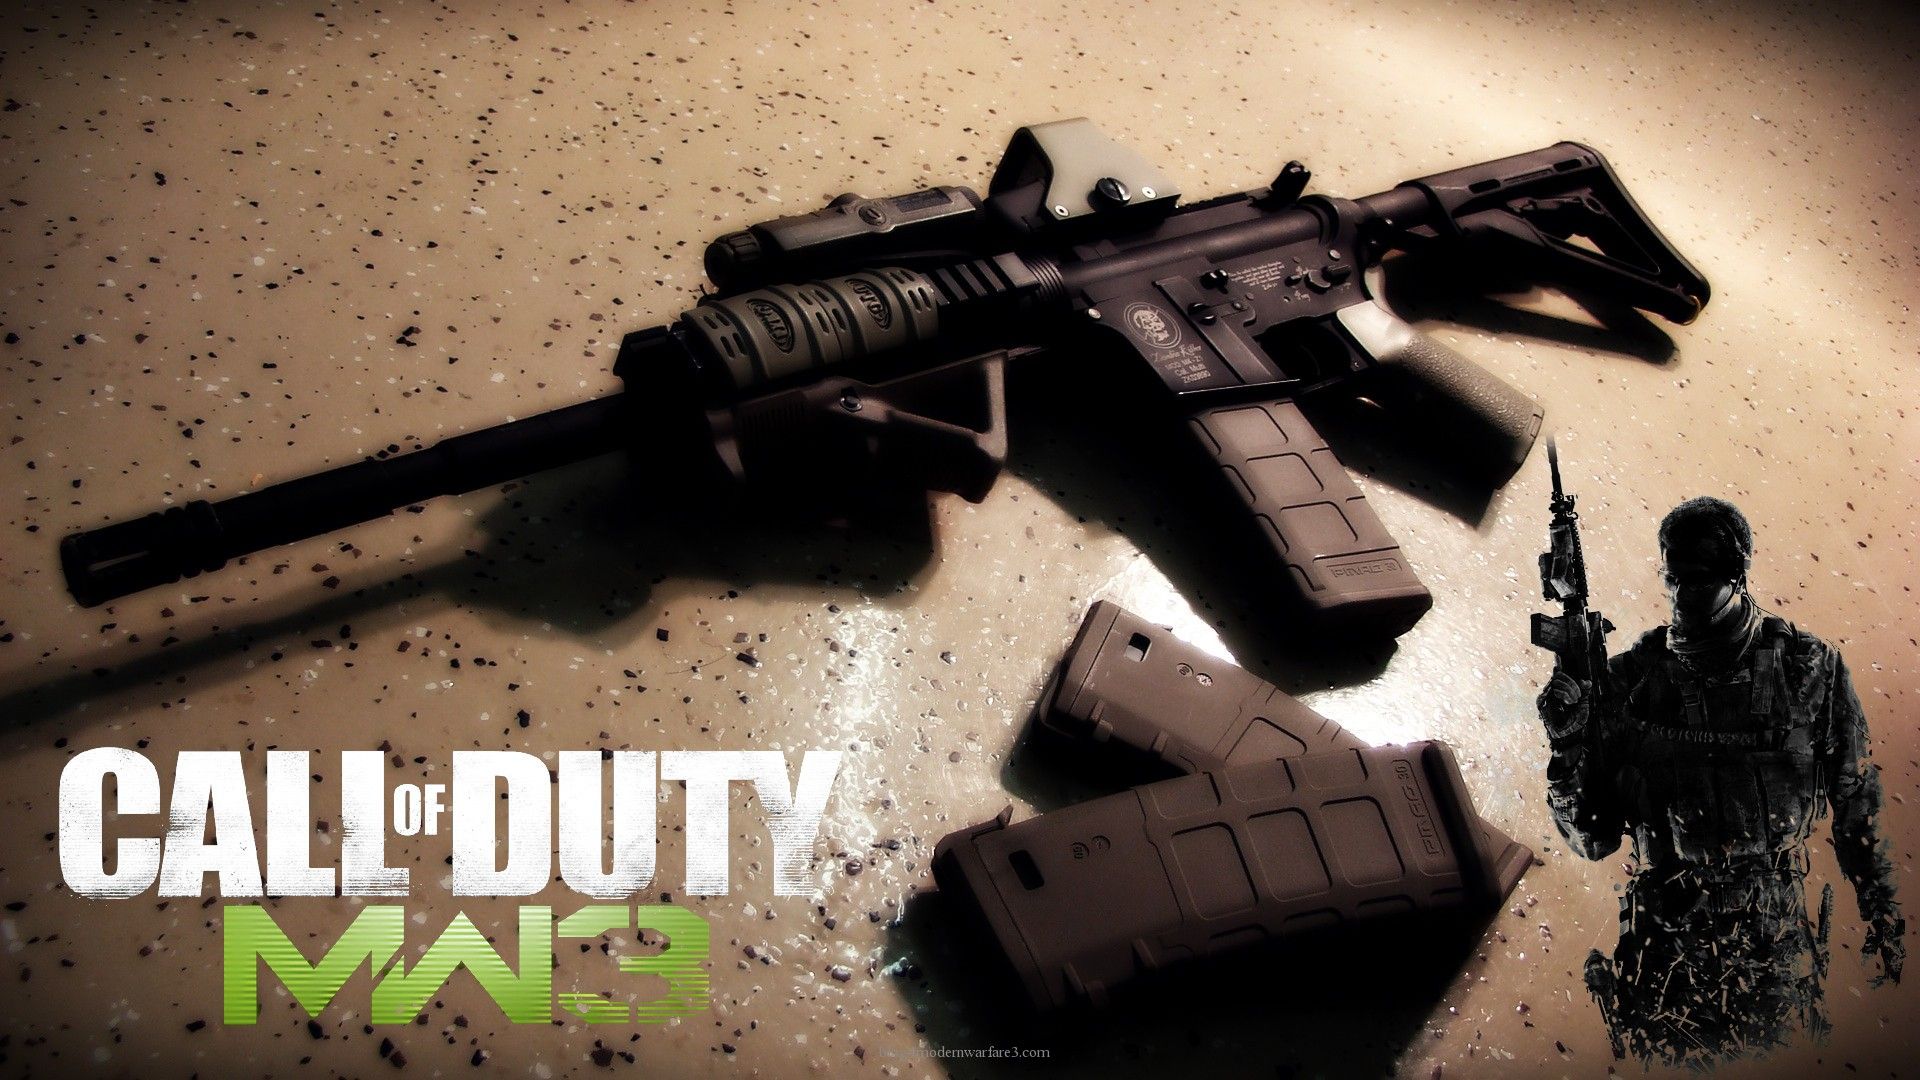 HD Quality War Game Call of Duty MW3 Wallpapers 12 Full Size ...